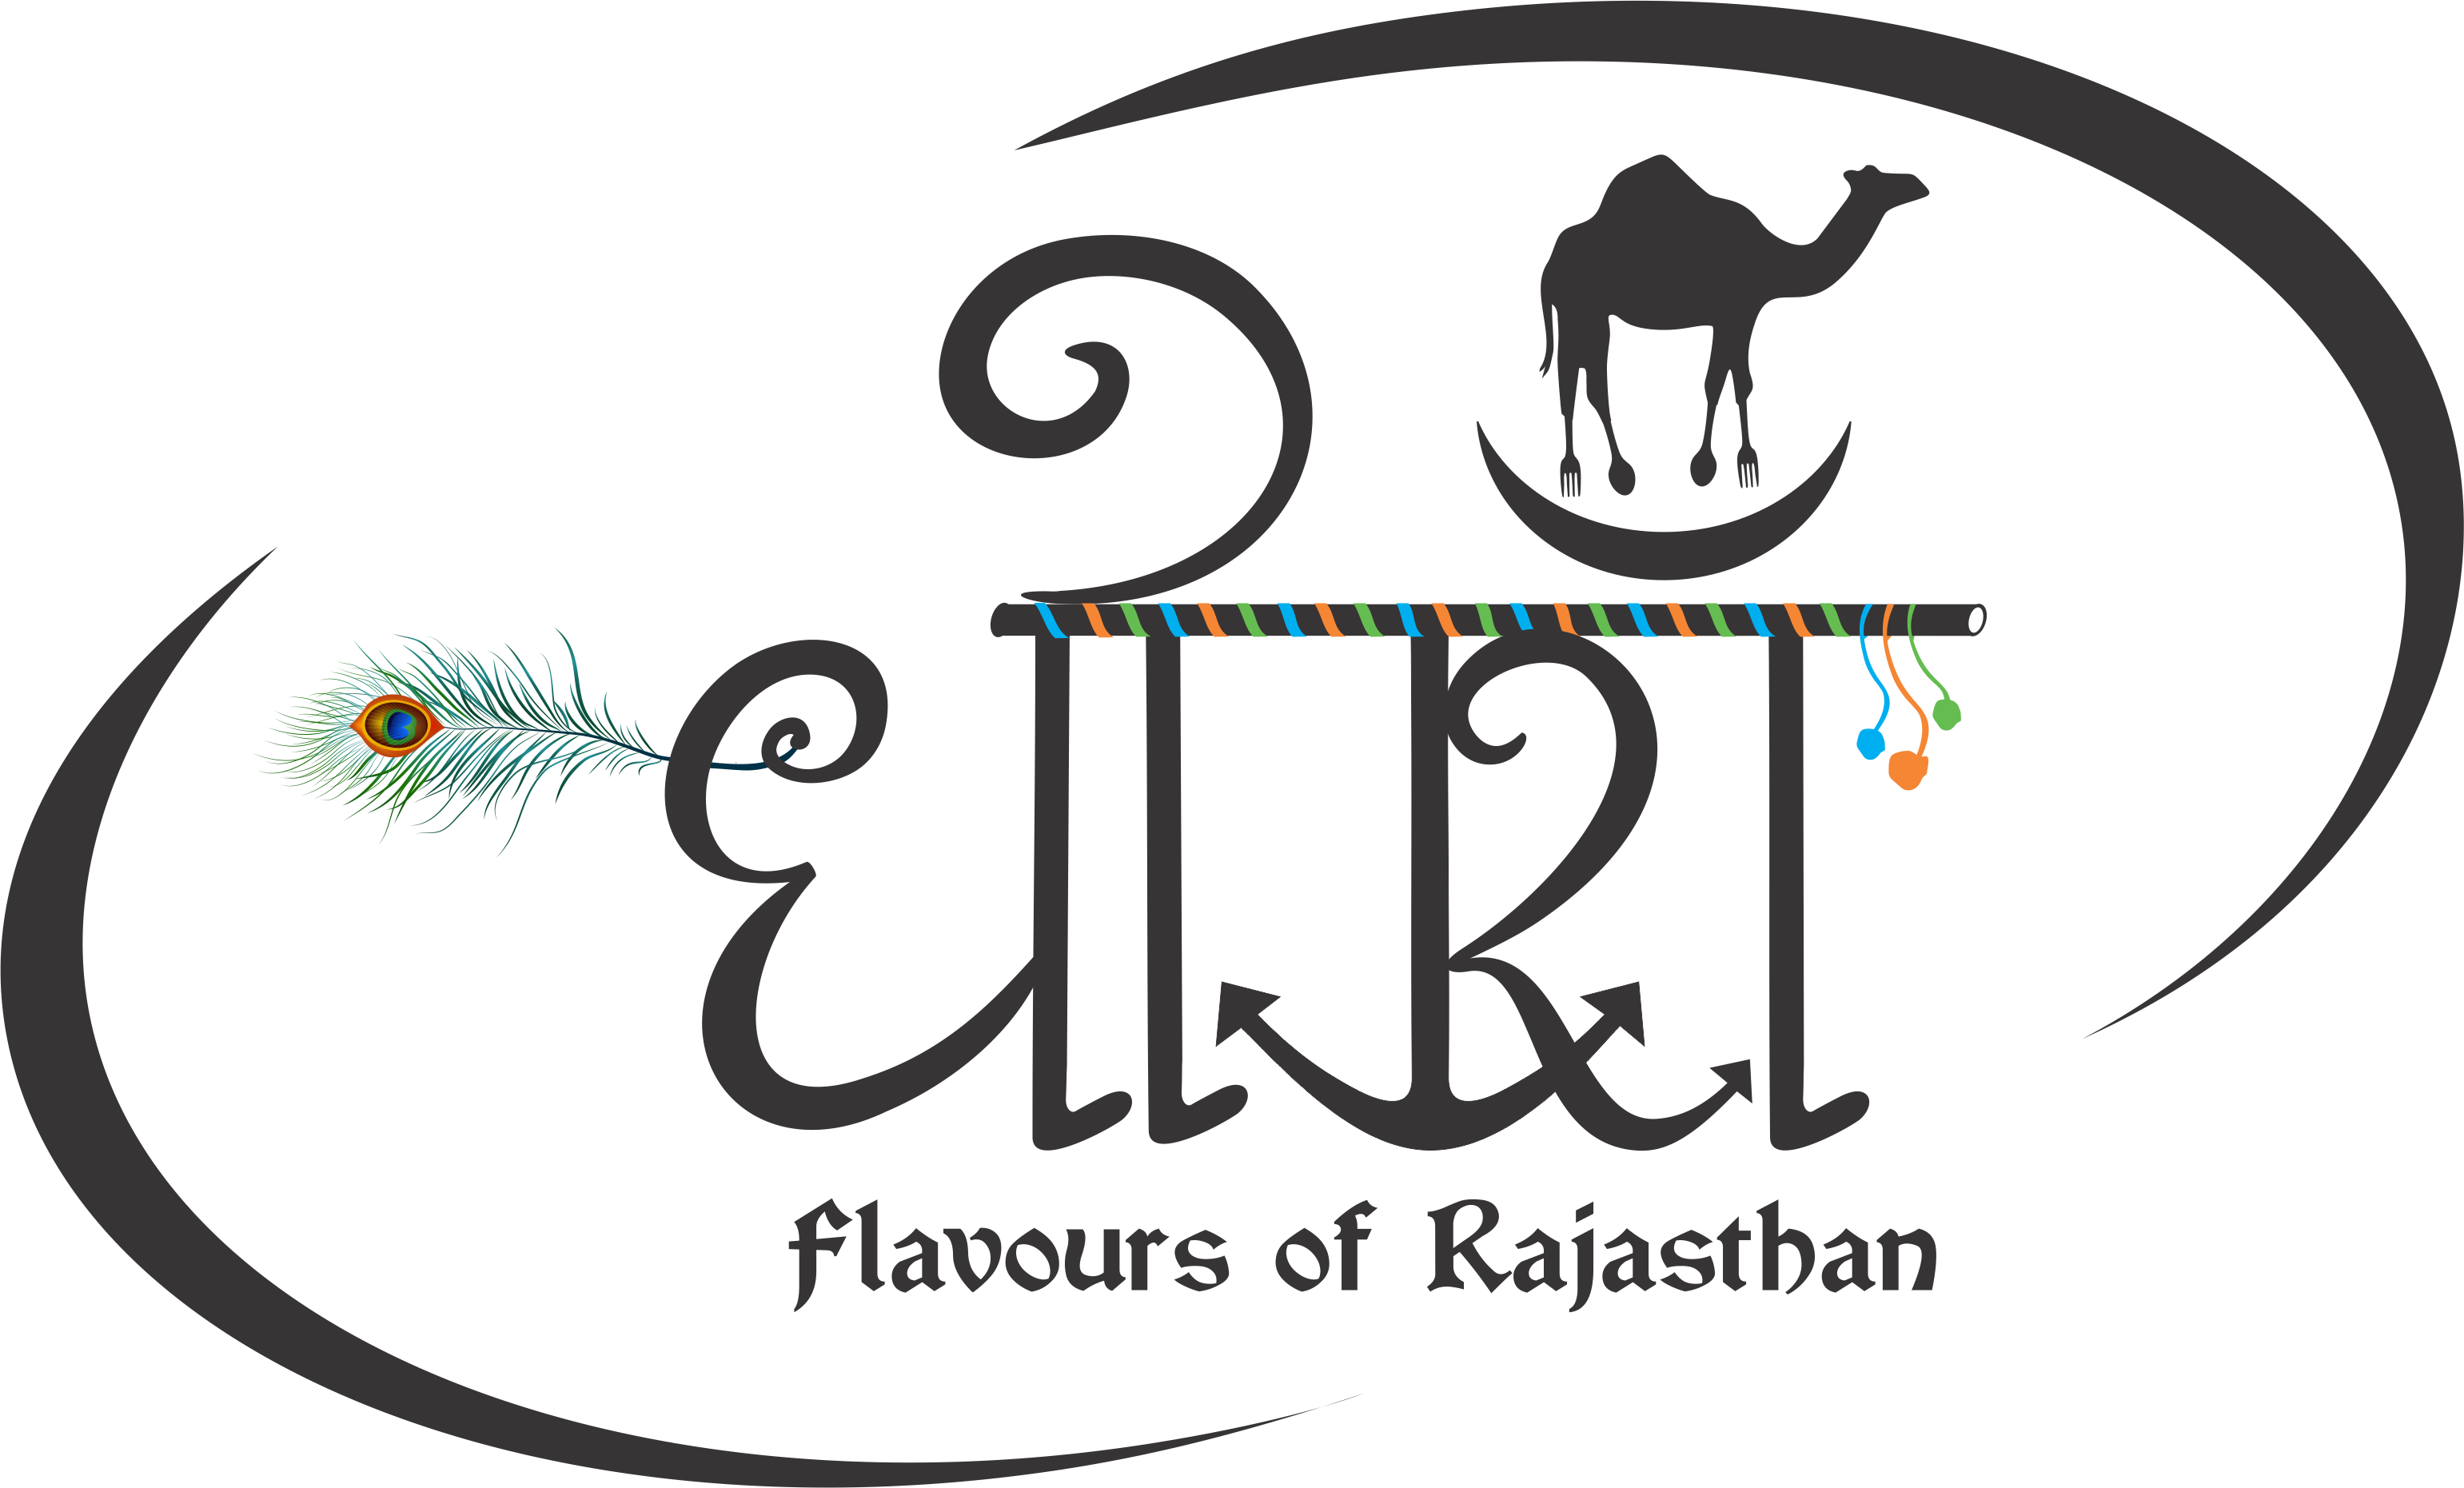 cook clipart rajasthani